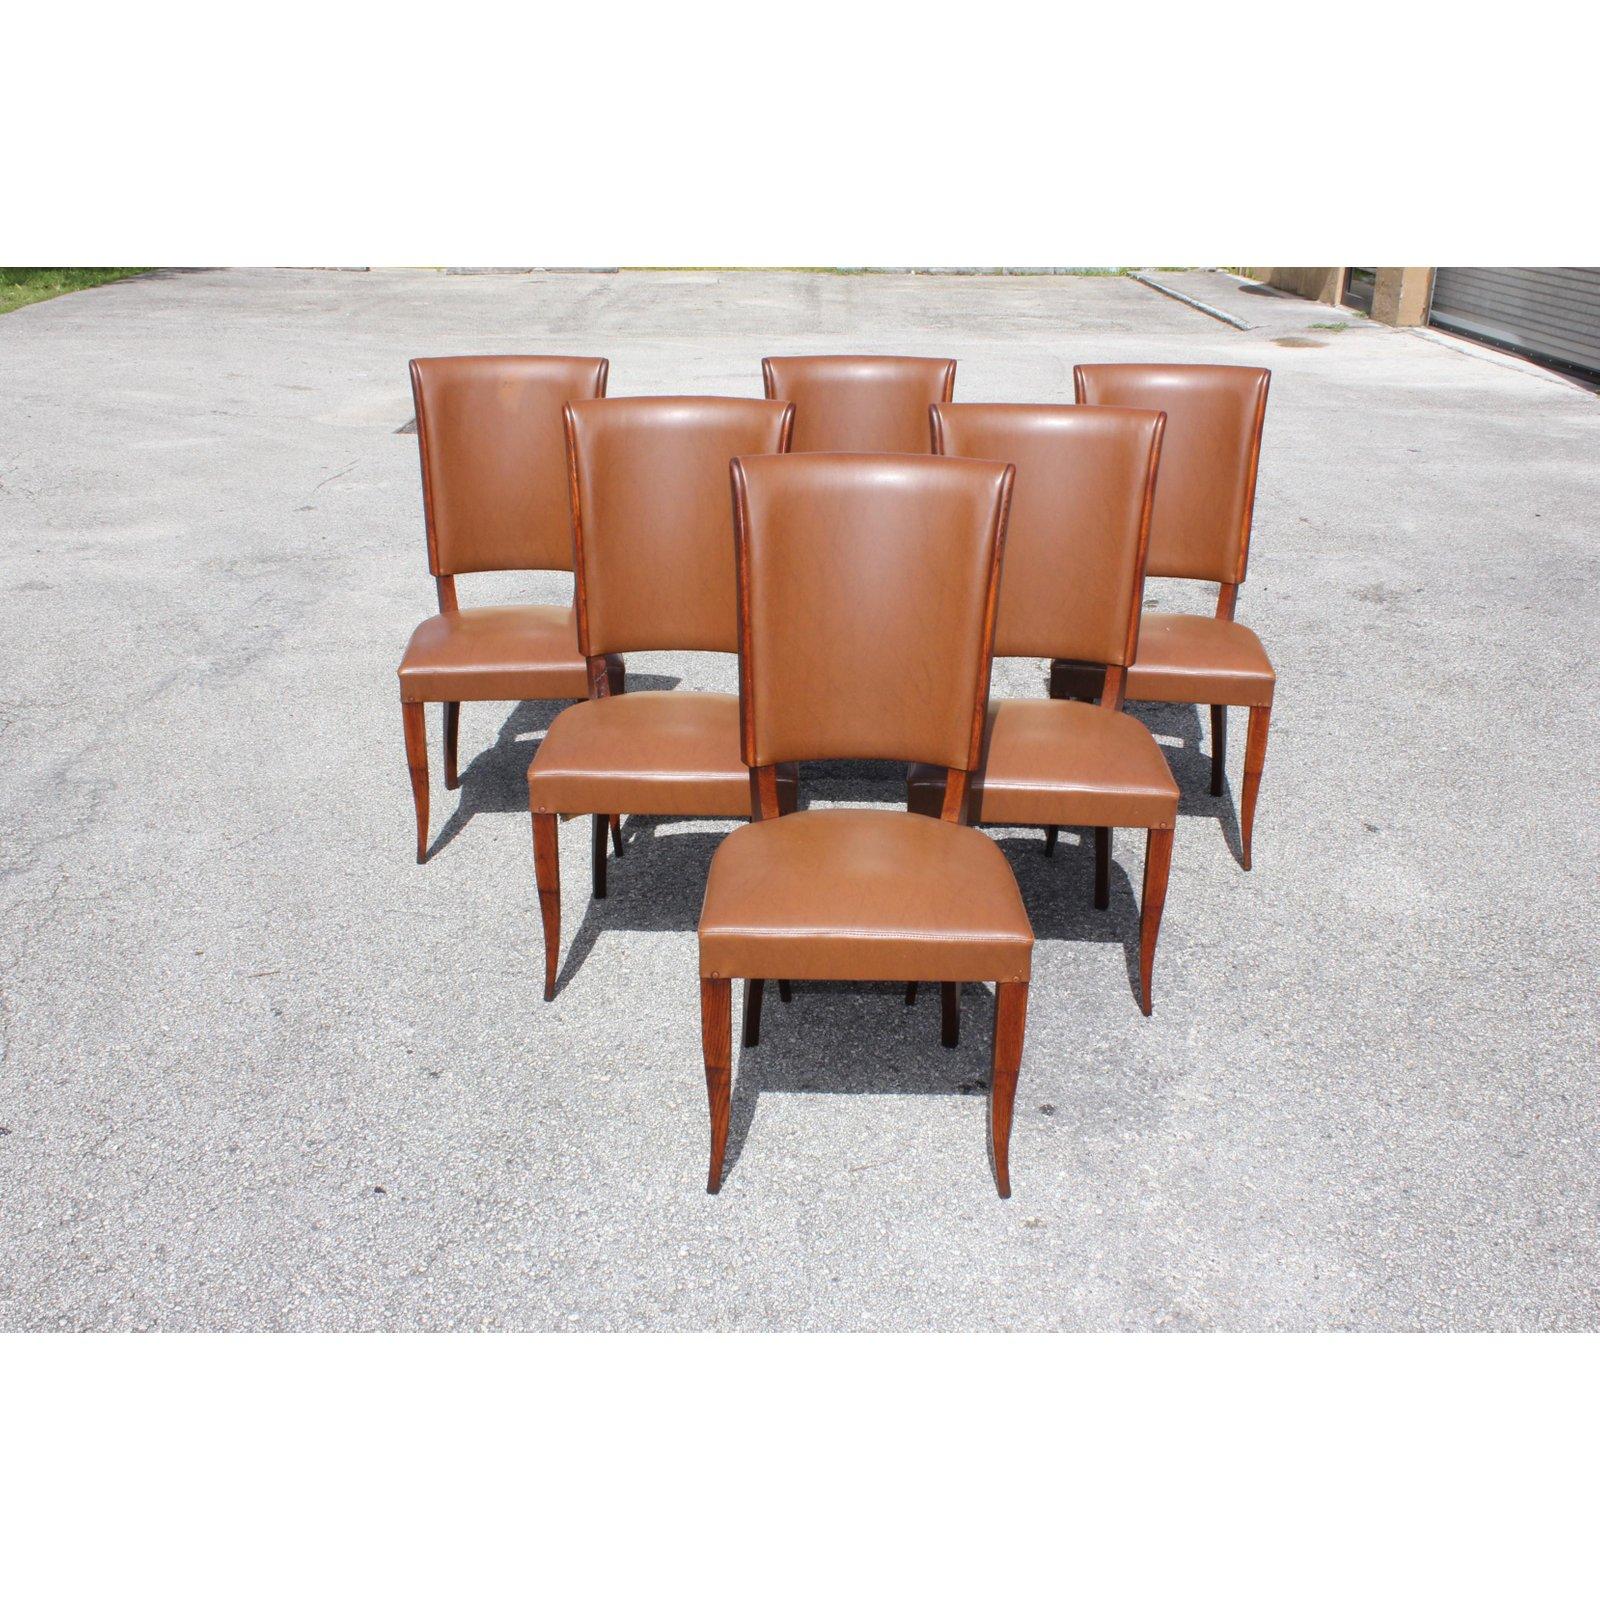 Classic set of six French Art Deco solid mahogany dining chairs 1940s. The chair frames are in excellent condition. Reupholstery is vinyl recommended for all 6 dining chairs, but the color of the dining chairs are beautiful, circa 1940s. Dimensions